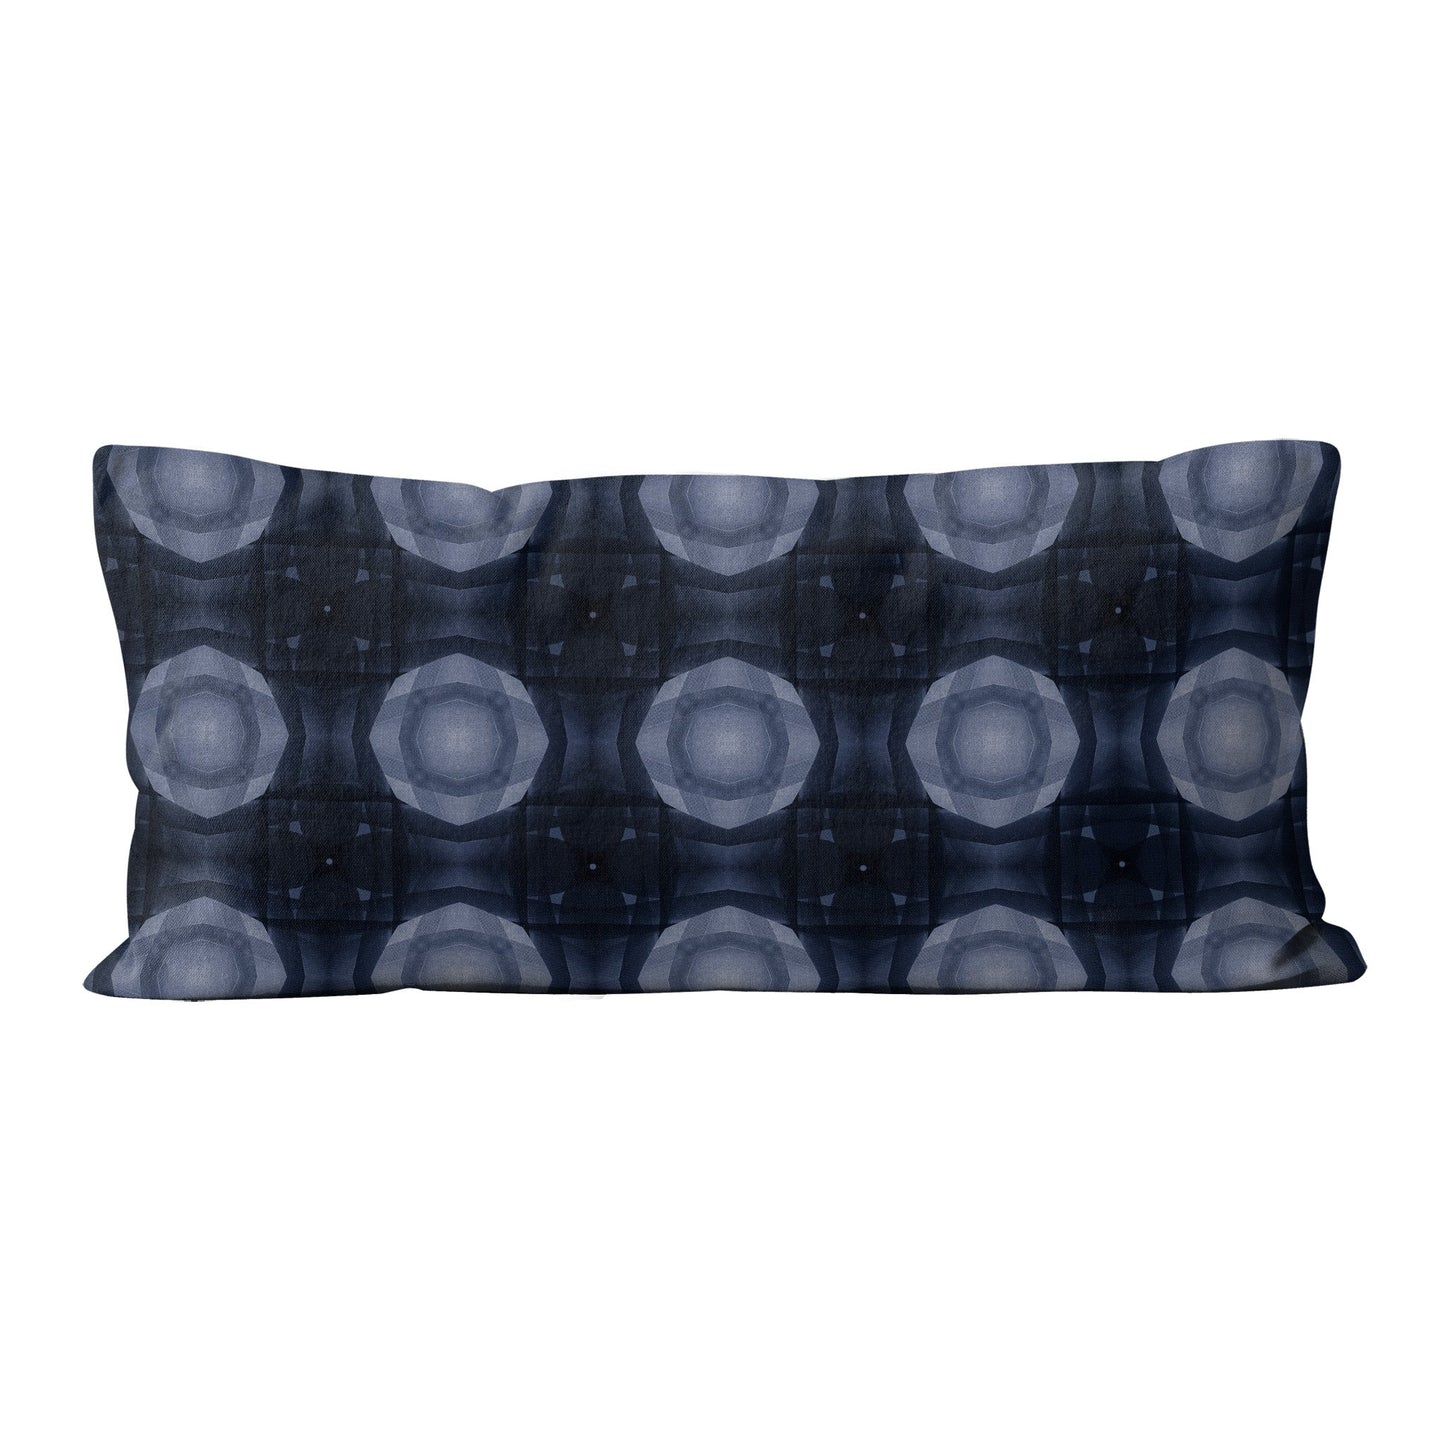 12  inch by 24 inch lumbar pillow featuring a collage-based geometric pattern in shades of blue.